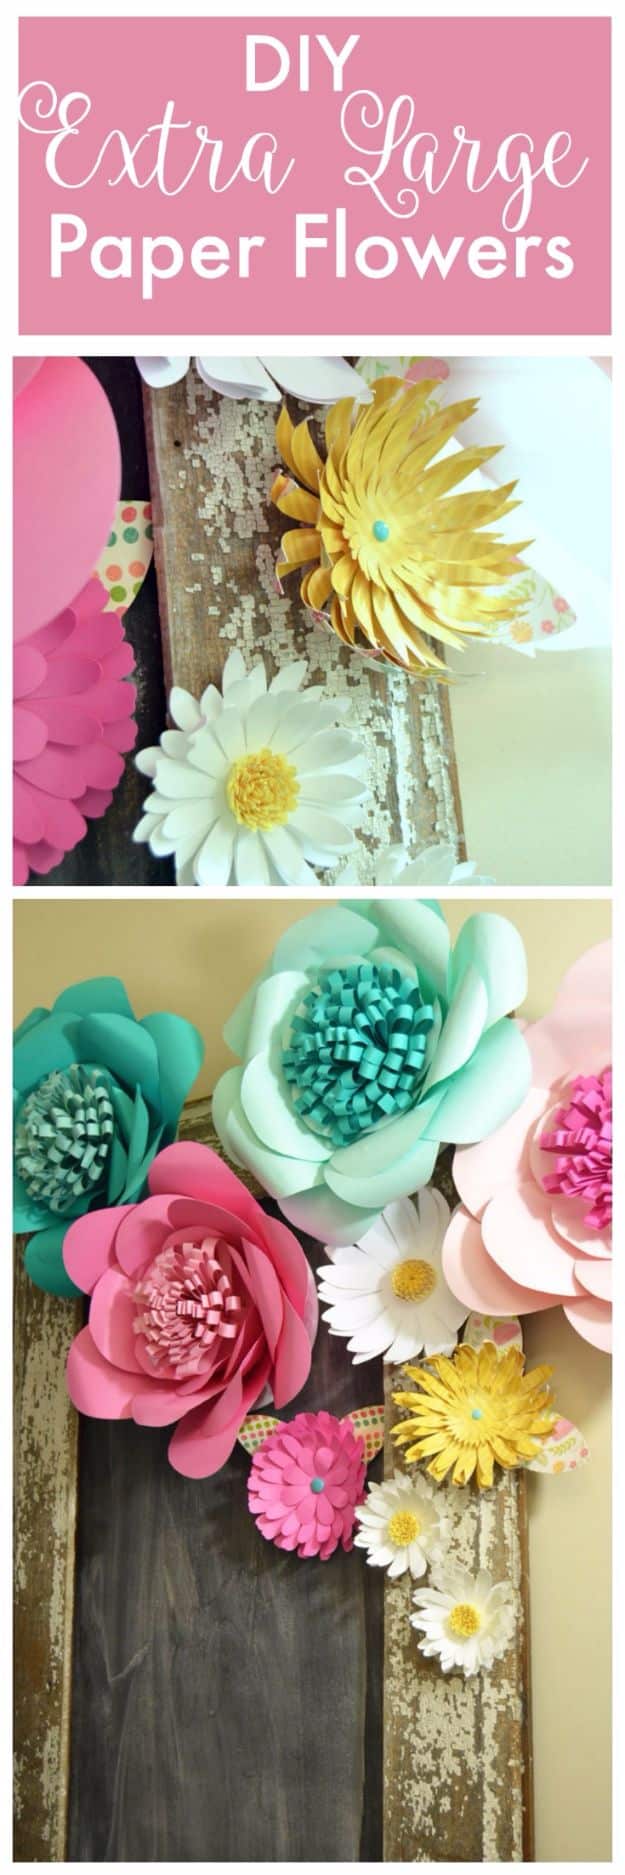 DIY Paper Flowers - DIY Extra Large Paper Flowers - How To Make A Paper Flower - Large Wedding Backdrop for Wall Decor - Easy Tissue Paper Flower Tutorial for Kids - Giant Projects for Photo Backdrops - Daisy, Roses, Bouquets, Centerpieces - Cricut Template and Step by Step Tutorial 